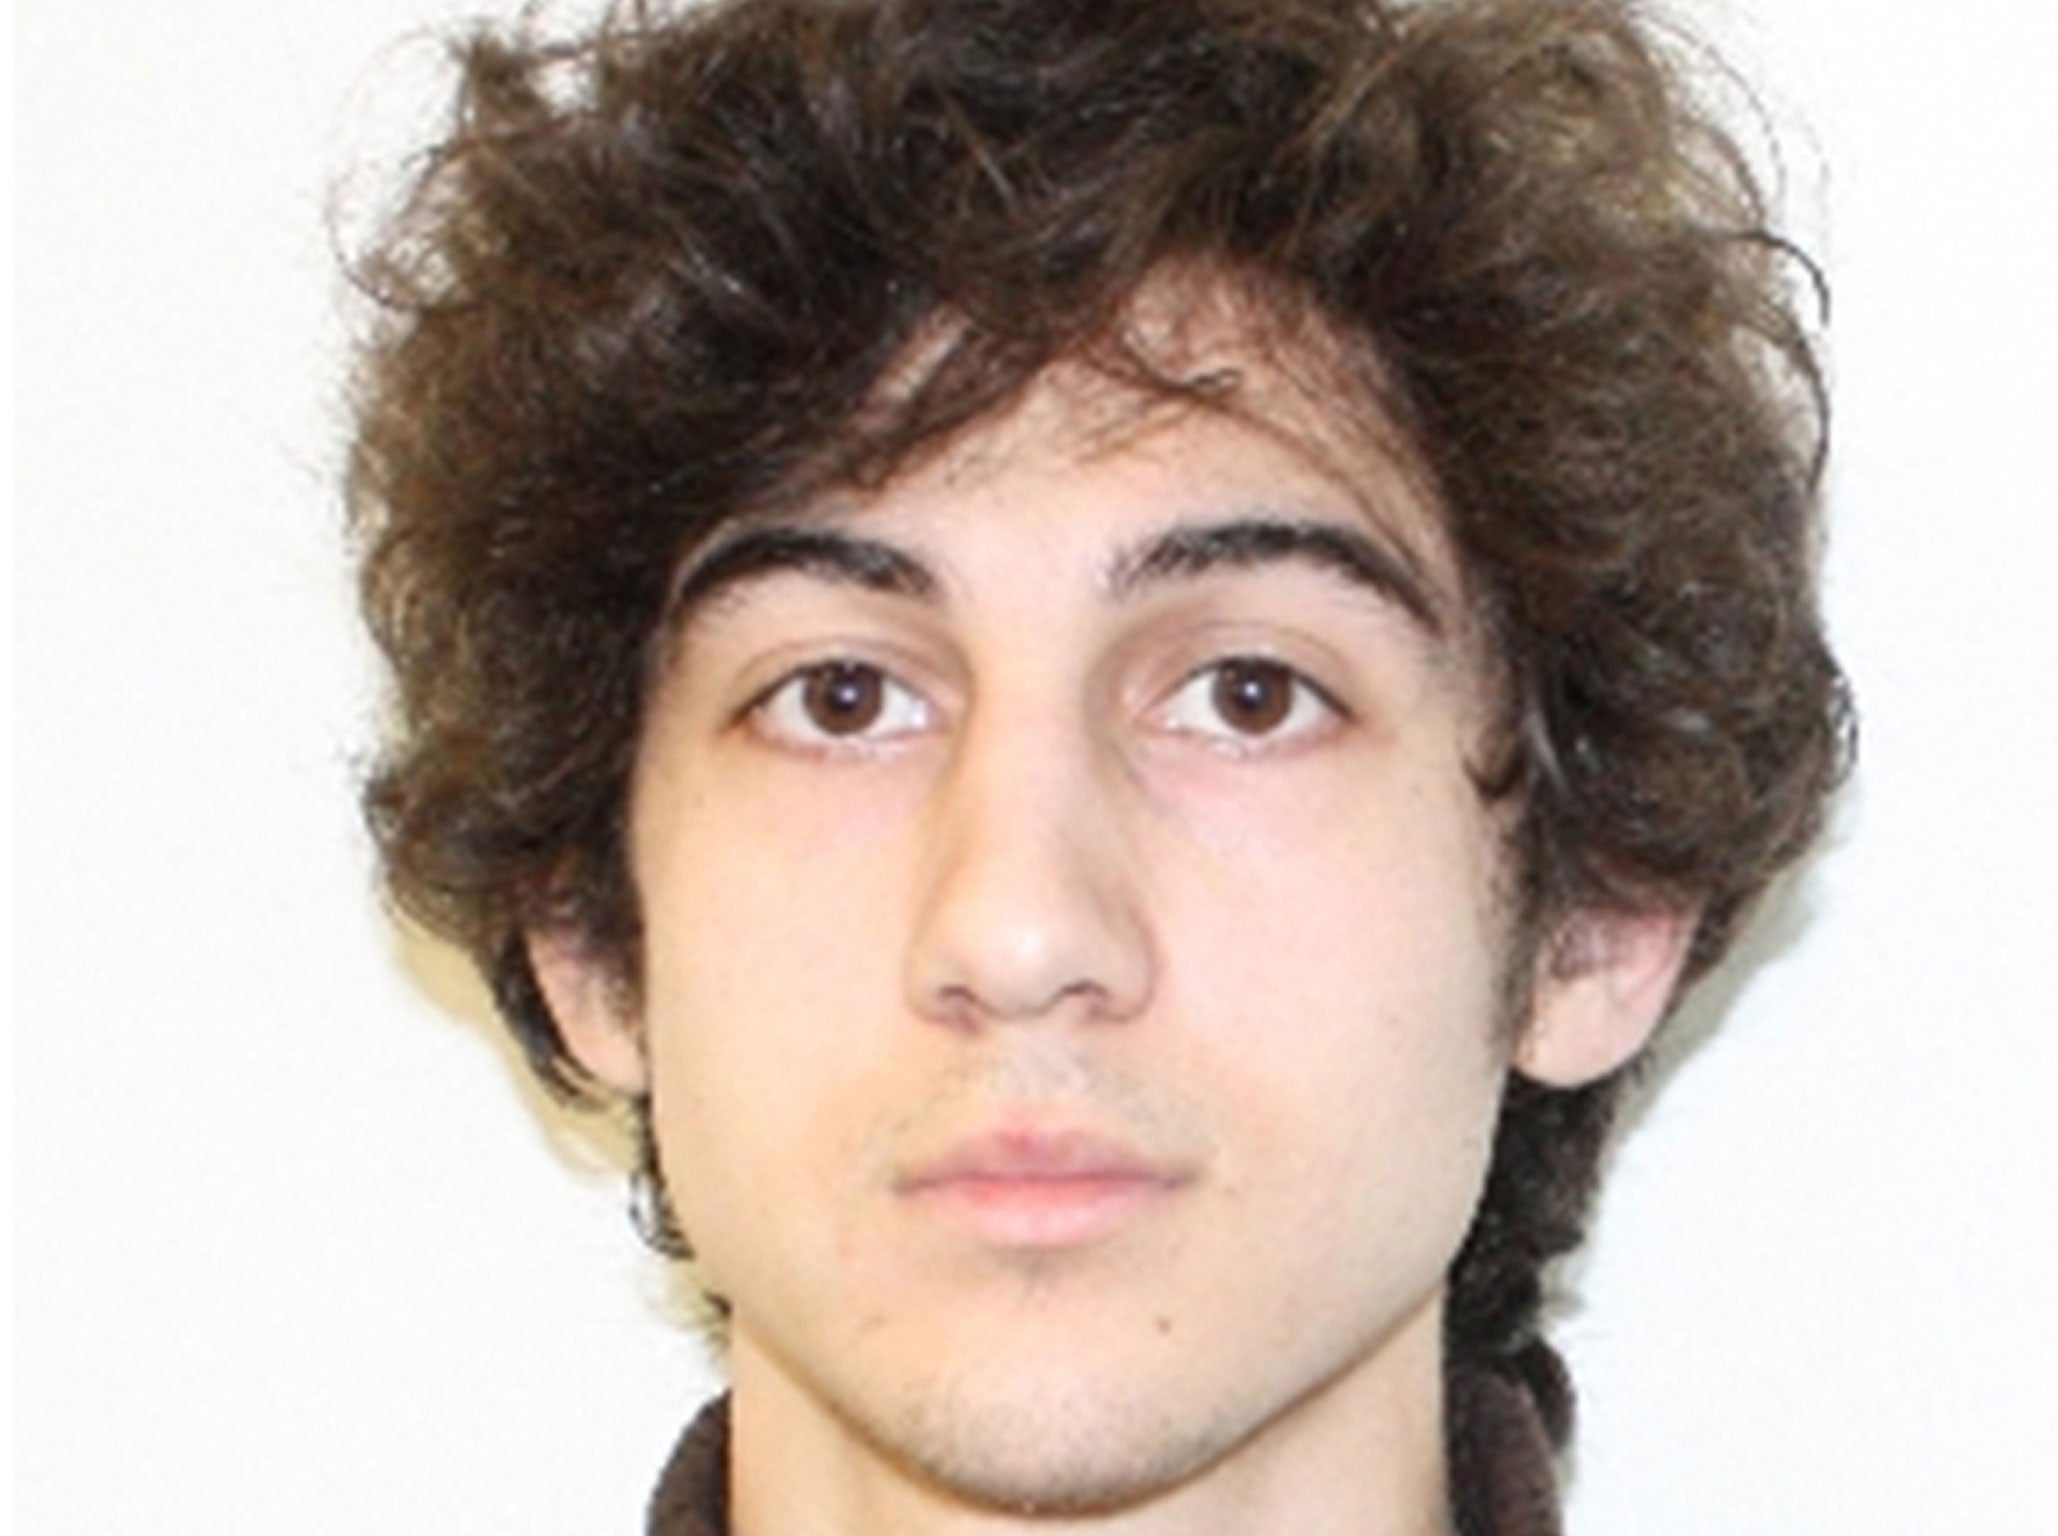 Dzhokhar Tsarnaev's brother was killed in a shoot-out with police